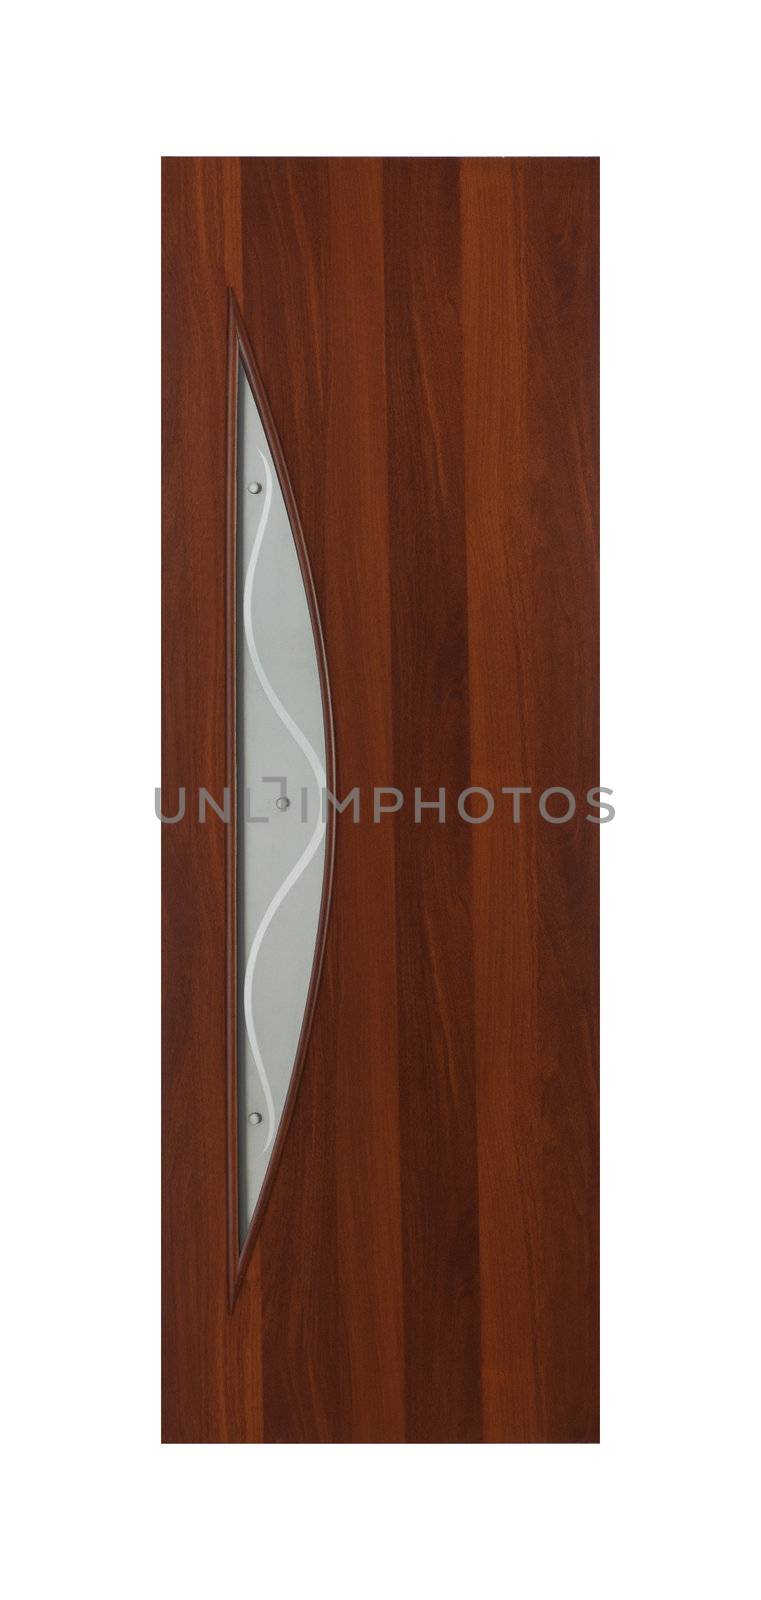 Common house interior door isolated on white background